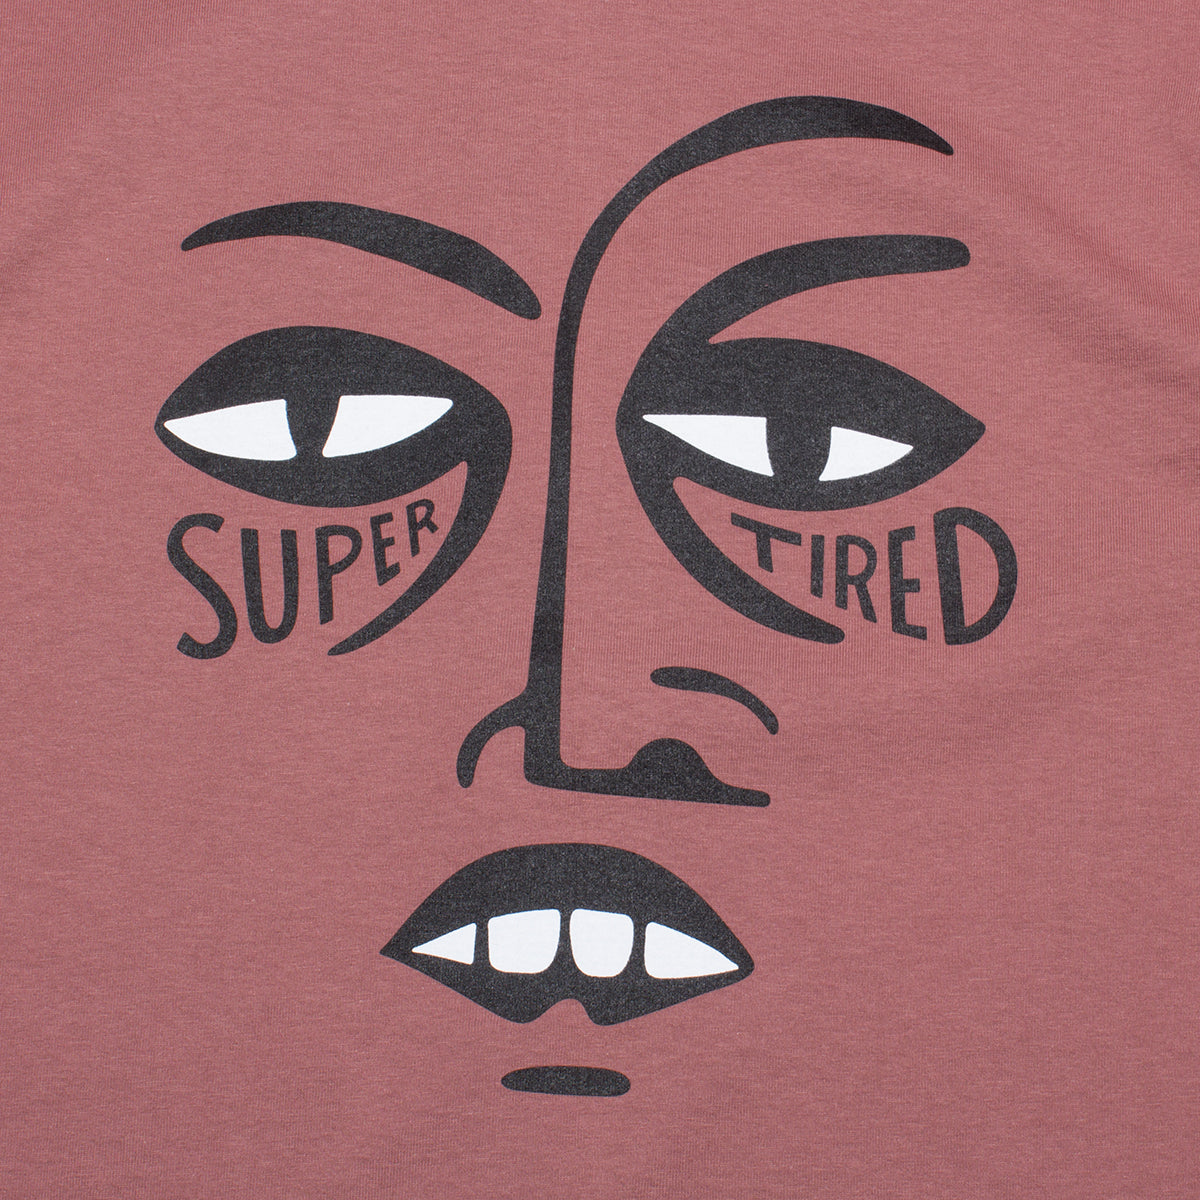 Tired Super Tired T-Shirt